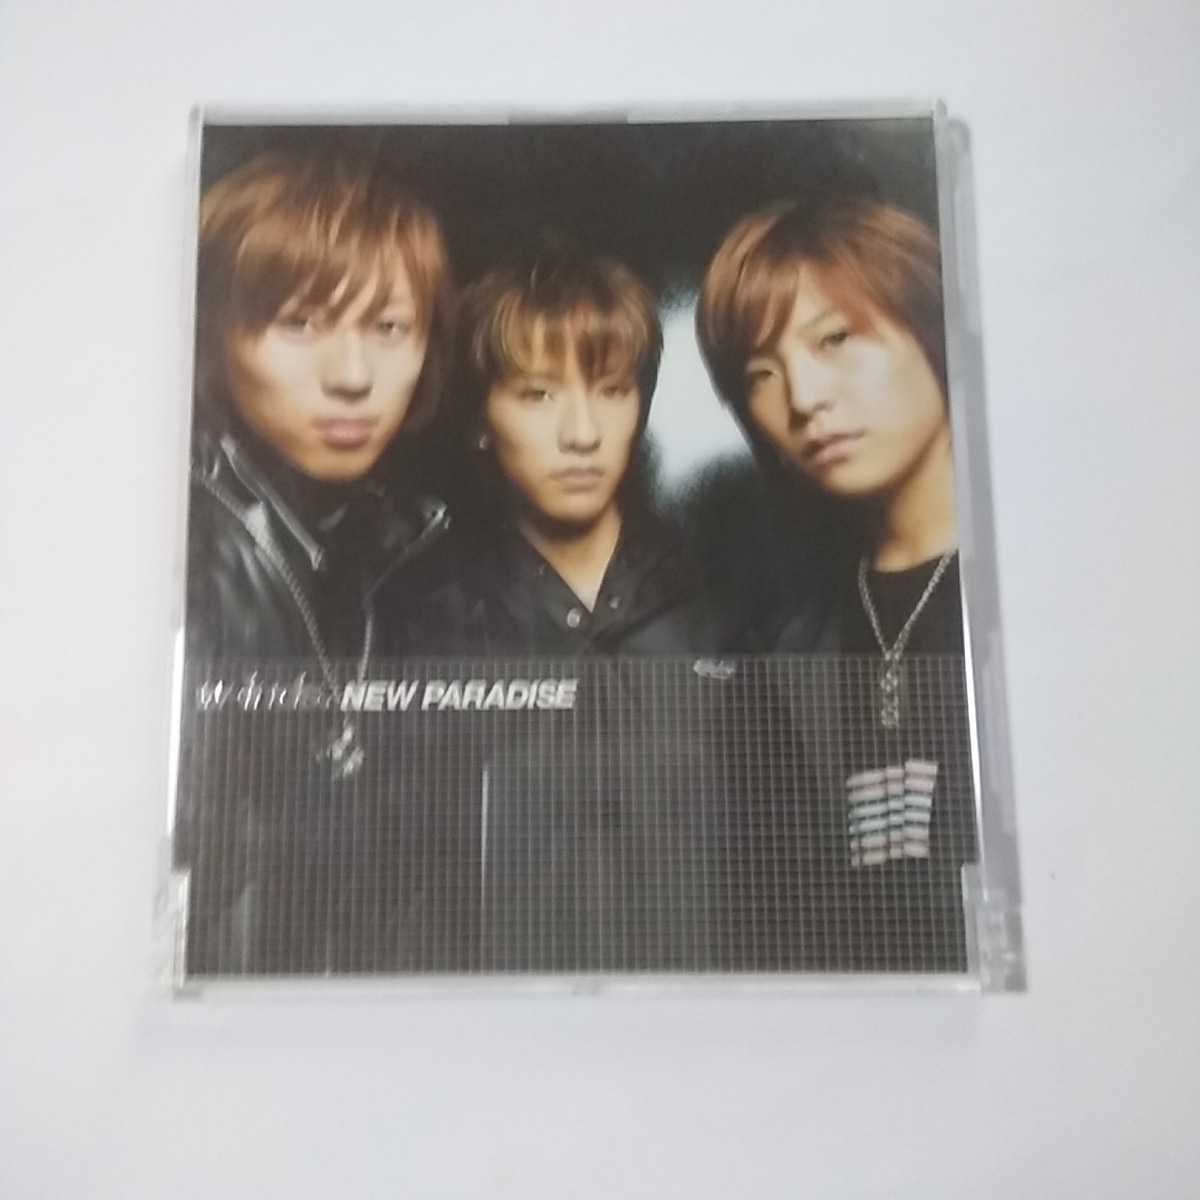 P085 CD W-inds　１．NEW PARADISE　２．Best of My Love　３．NEW PARADISEーCANDY Future-　４．NEW PARADISE（Instrumental）_画像3